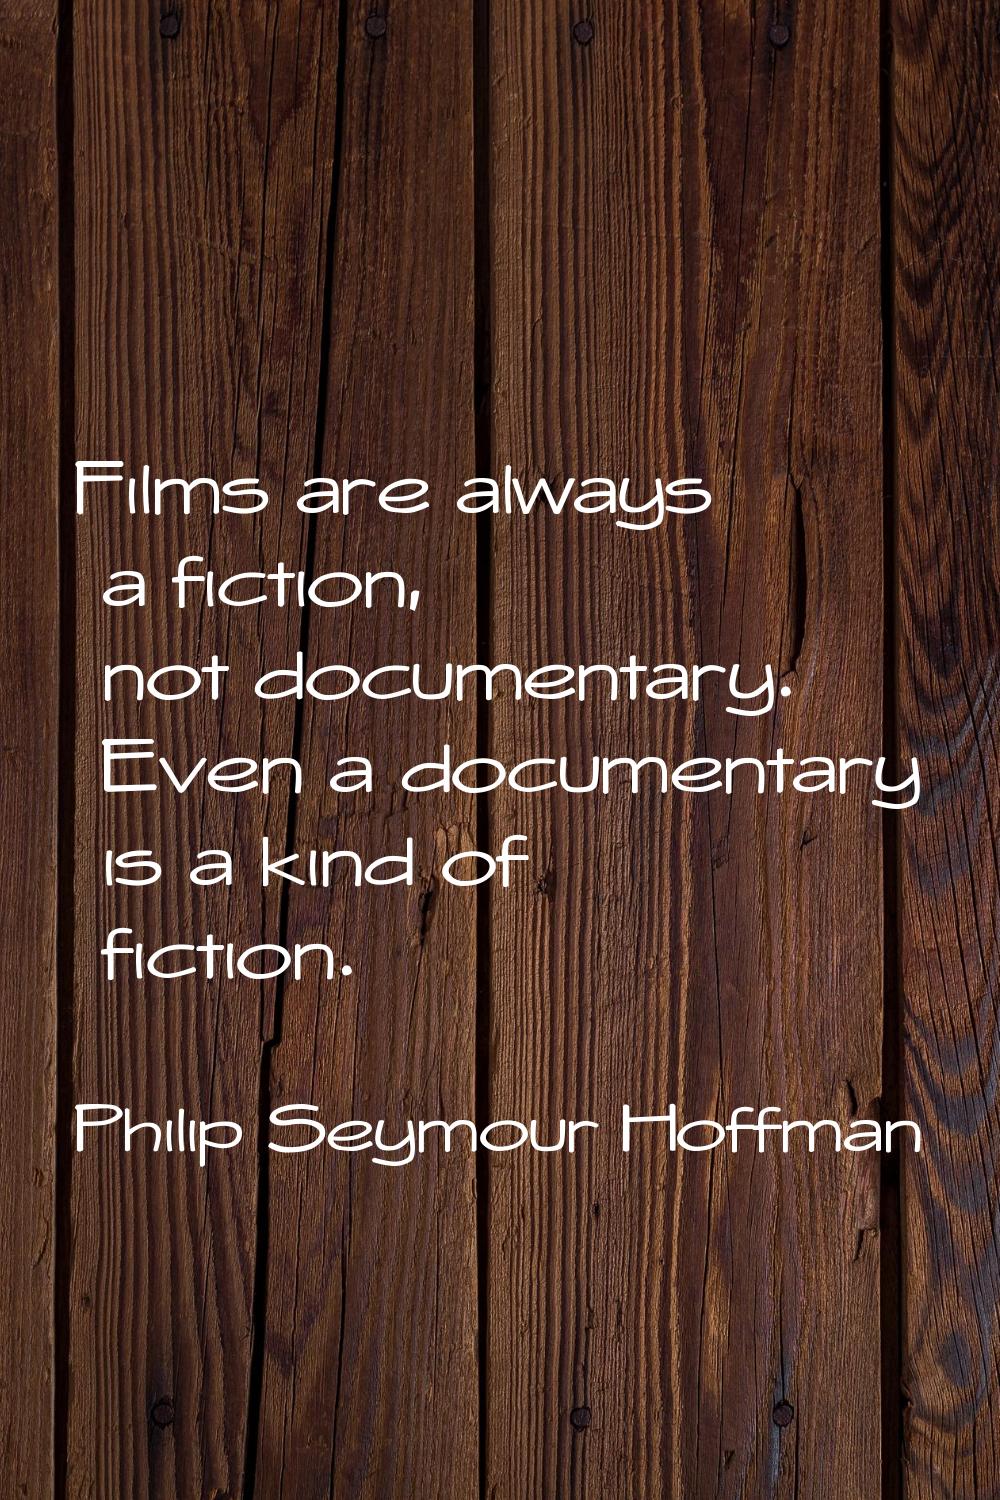 Films are always a fiction, not documentary. Even a documentary is a kind of fiction.